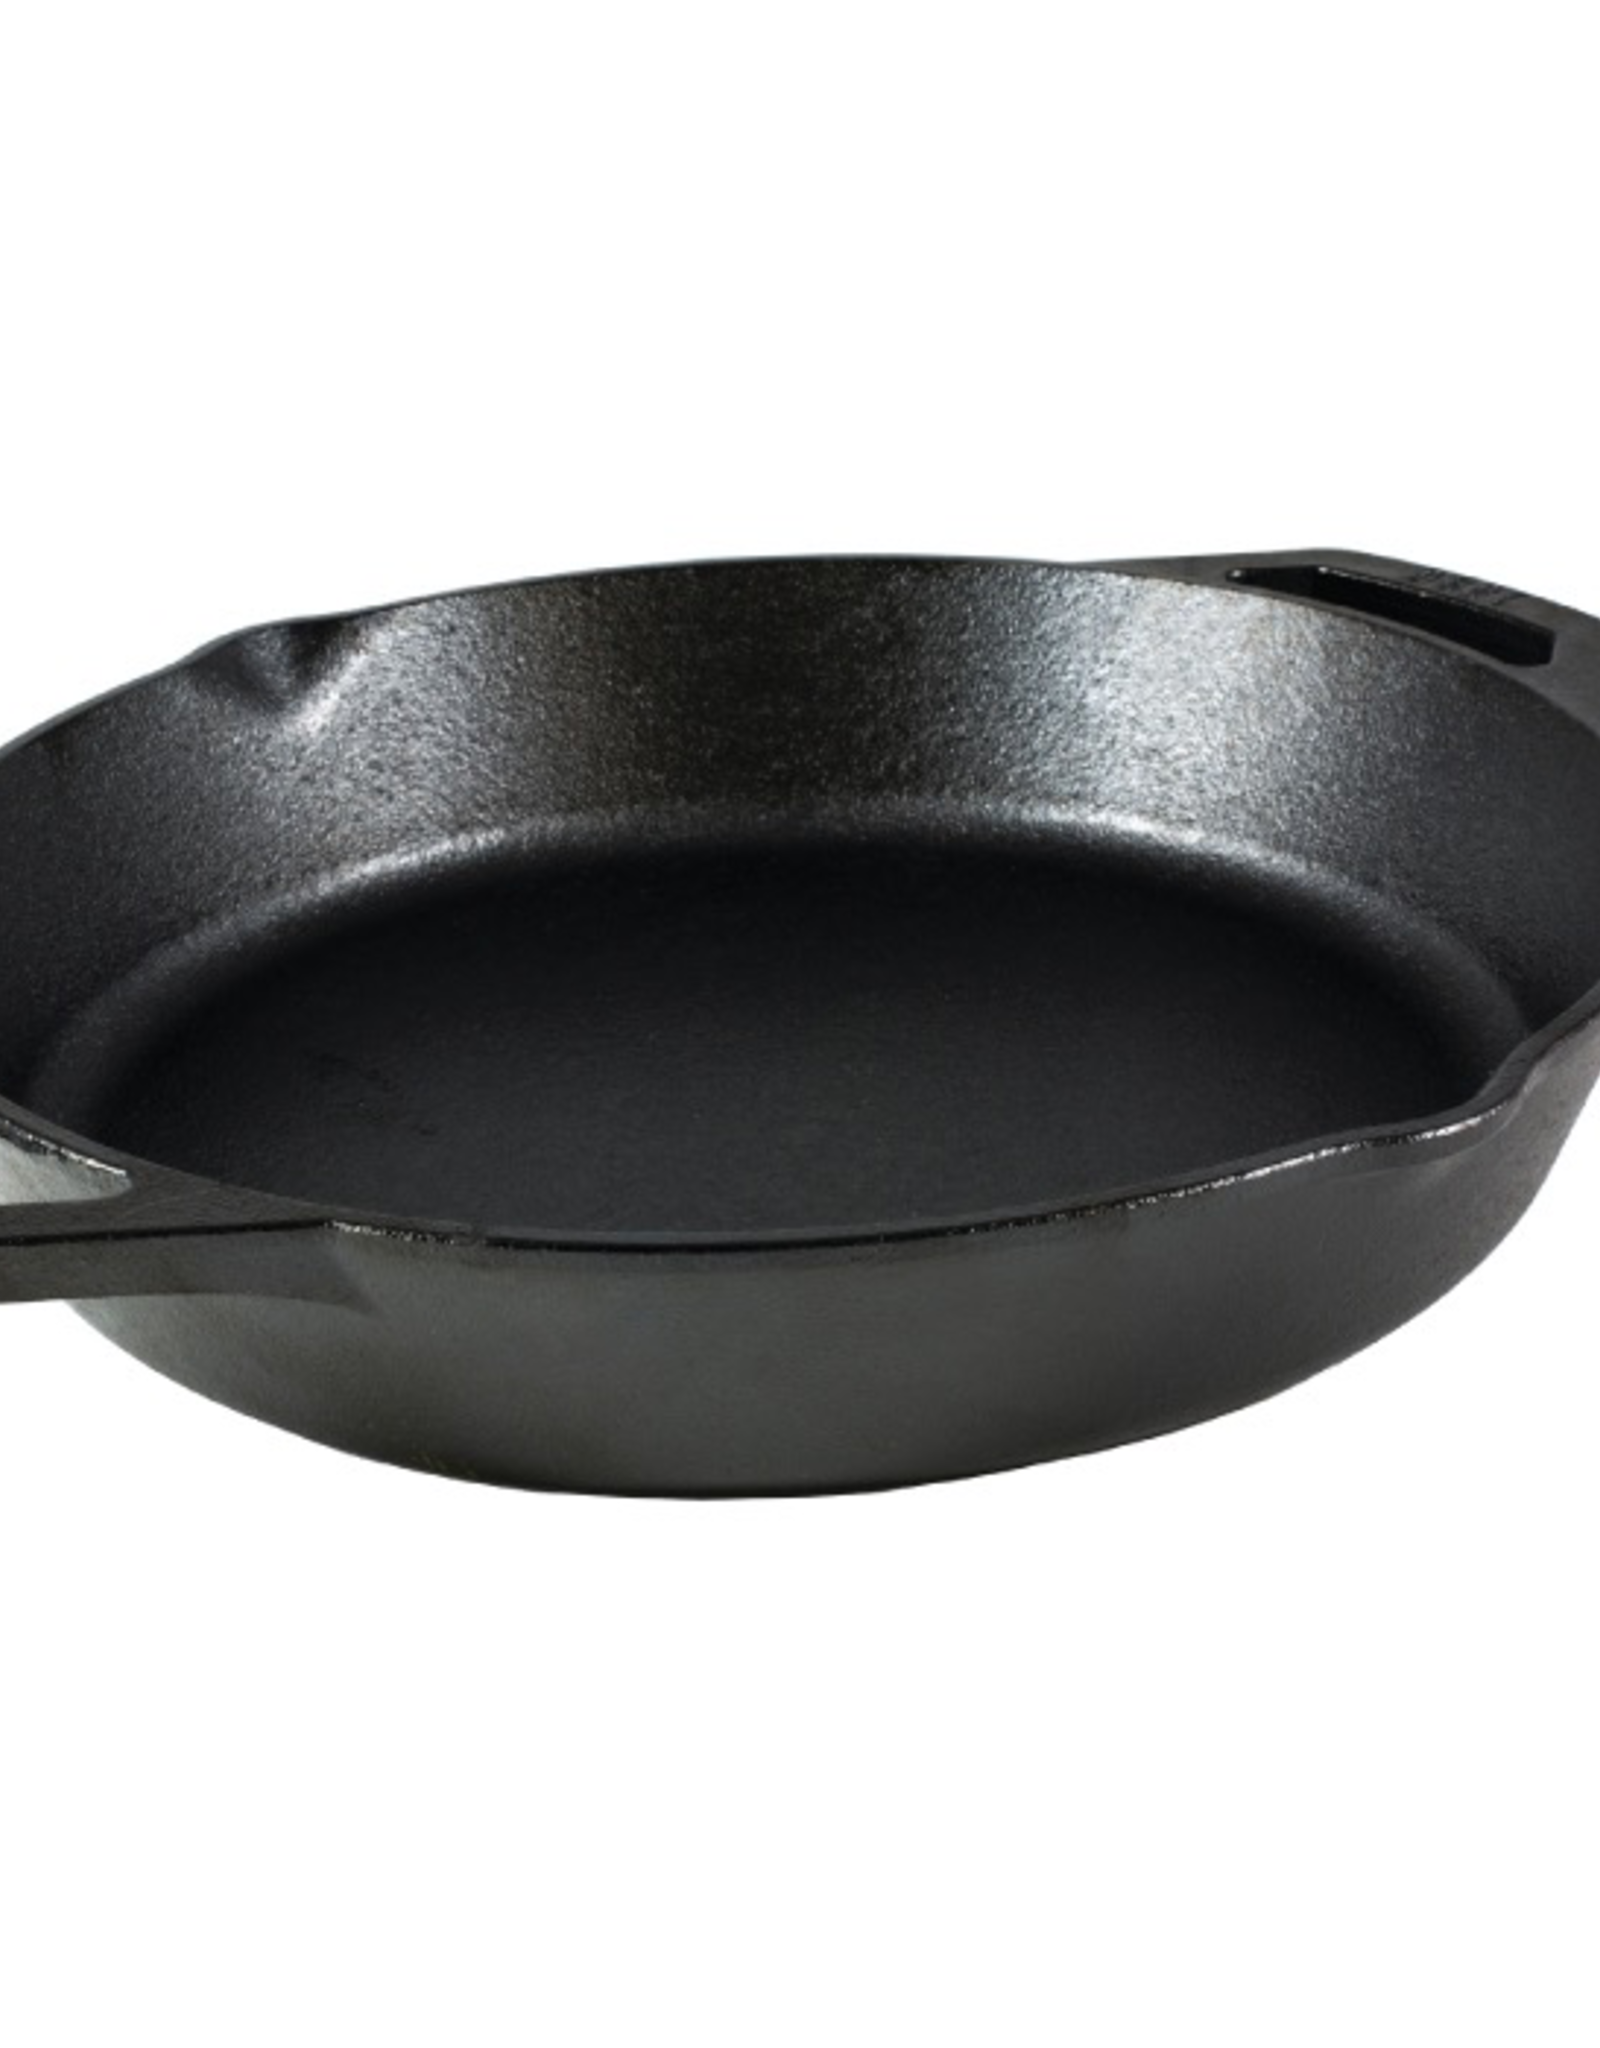 Cast Iron Skillet with Loop Handles 10.25”